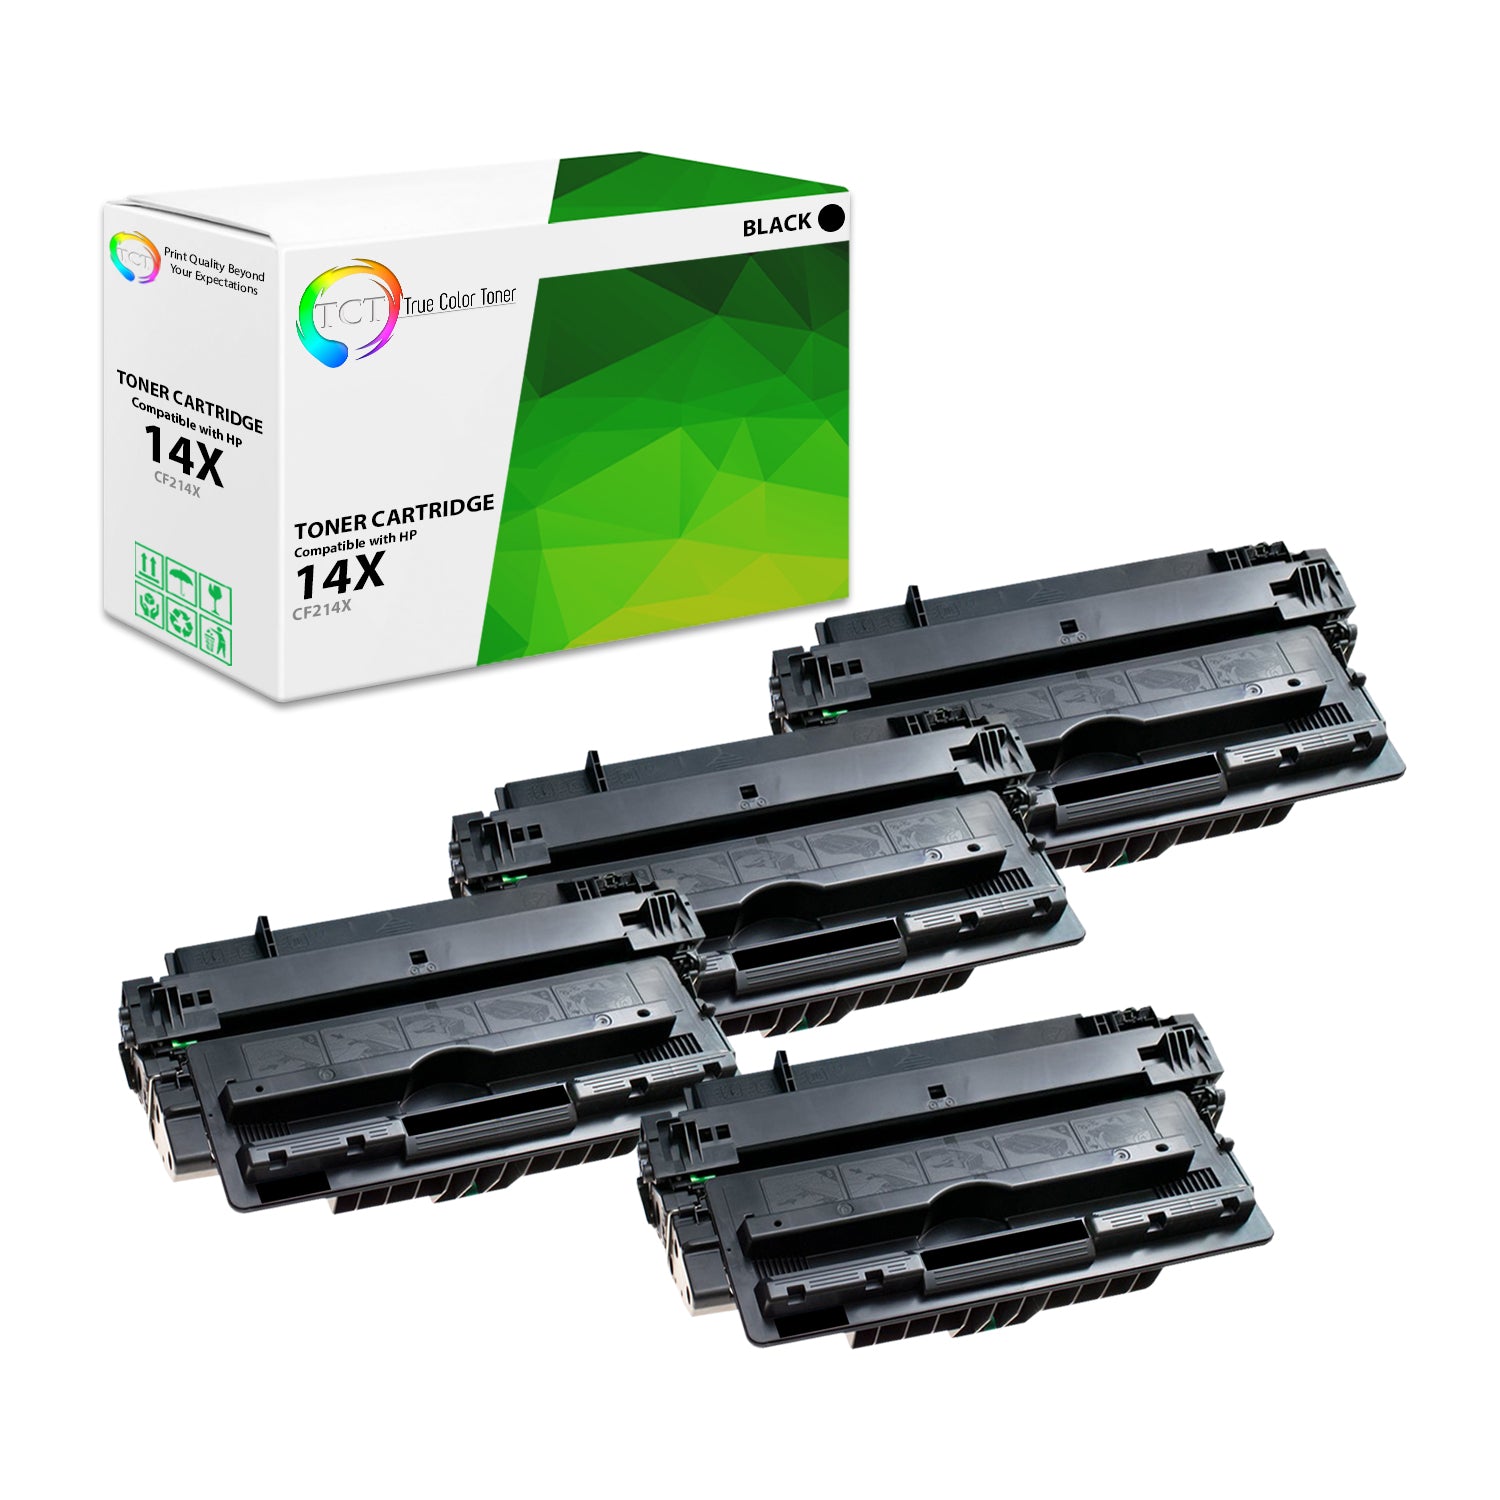 TCT Compatible High Yield Toner Cartridge Replacement for the HP 14X Series - 4 Pack Black